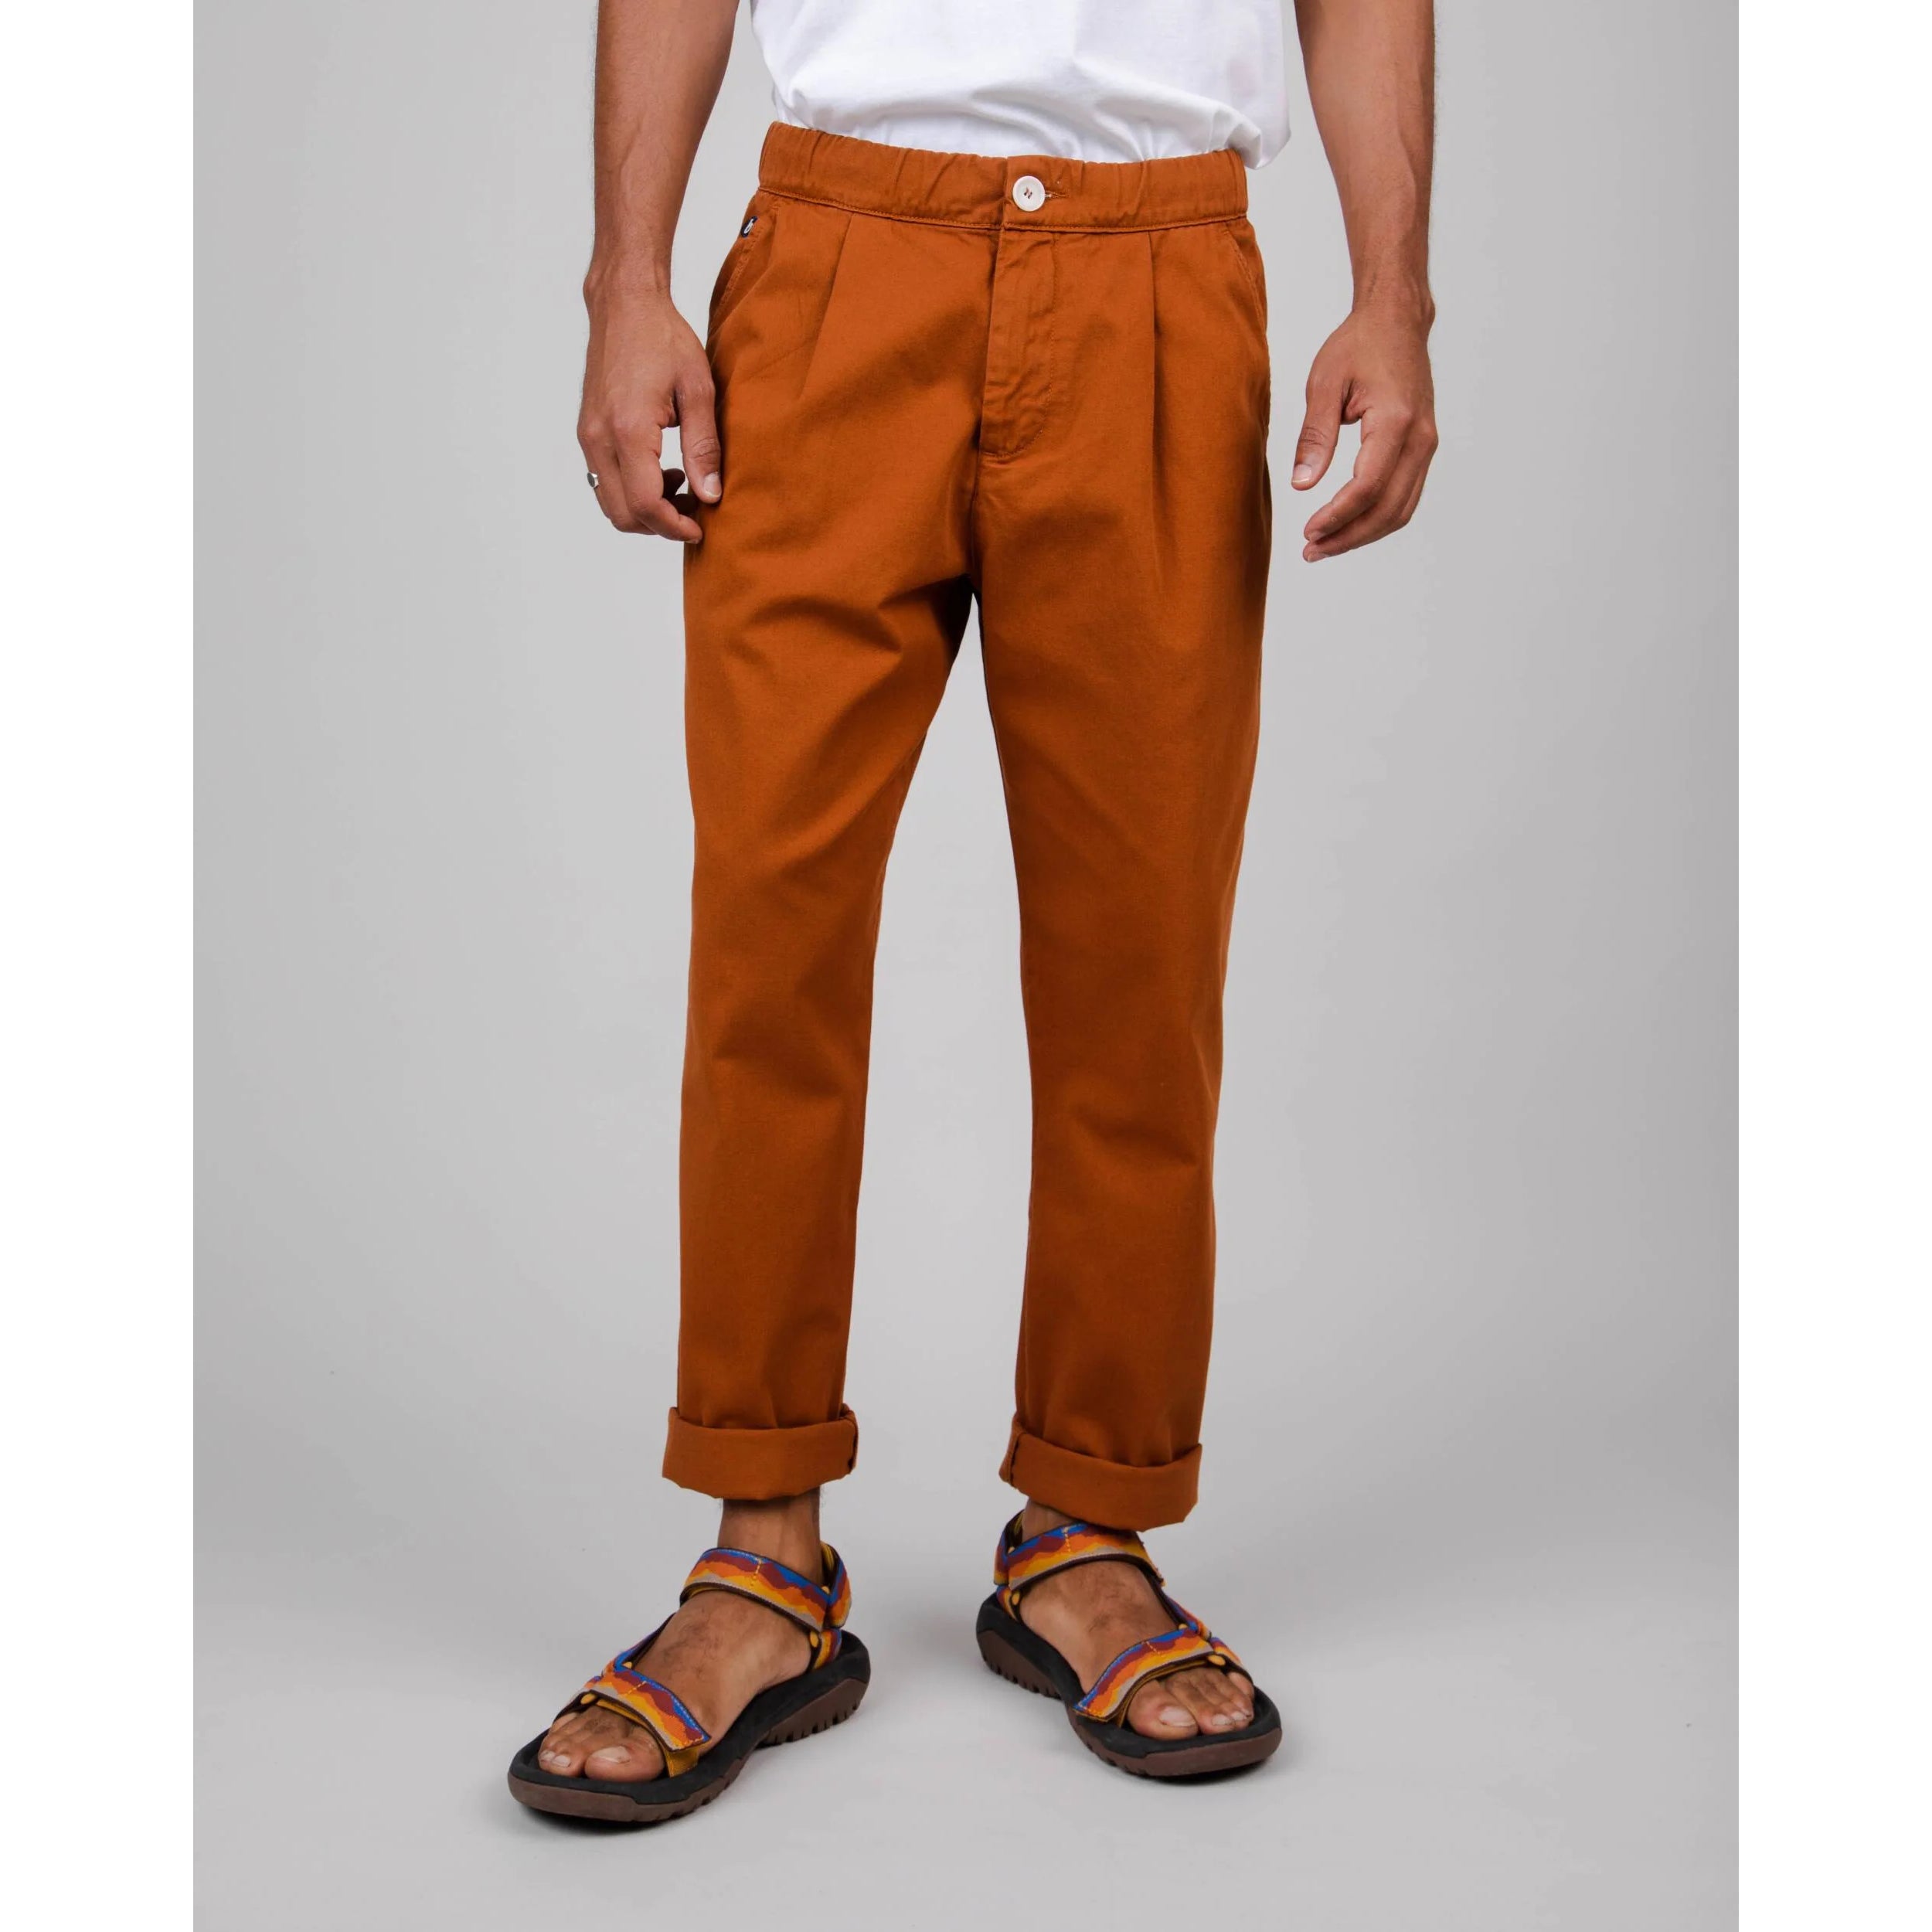 Men's Skinny Fit Chino Pants - Goodfellow & Co™ : Target